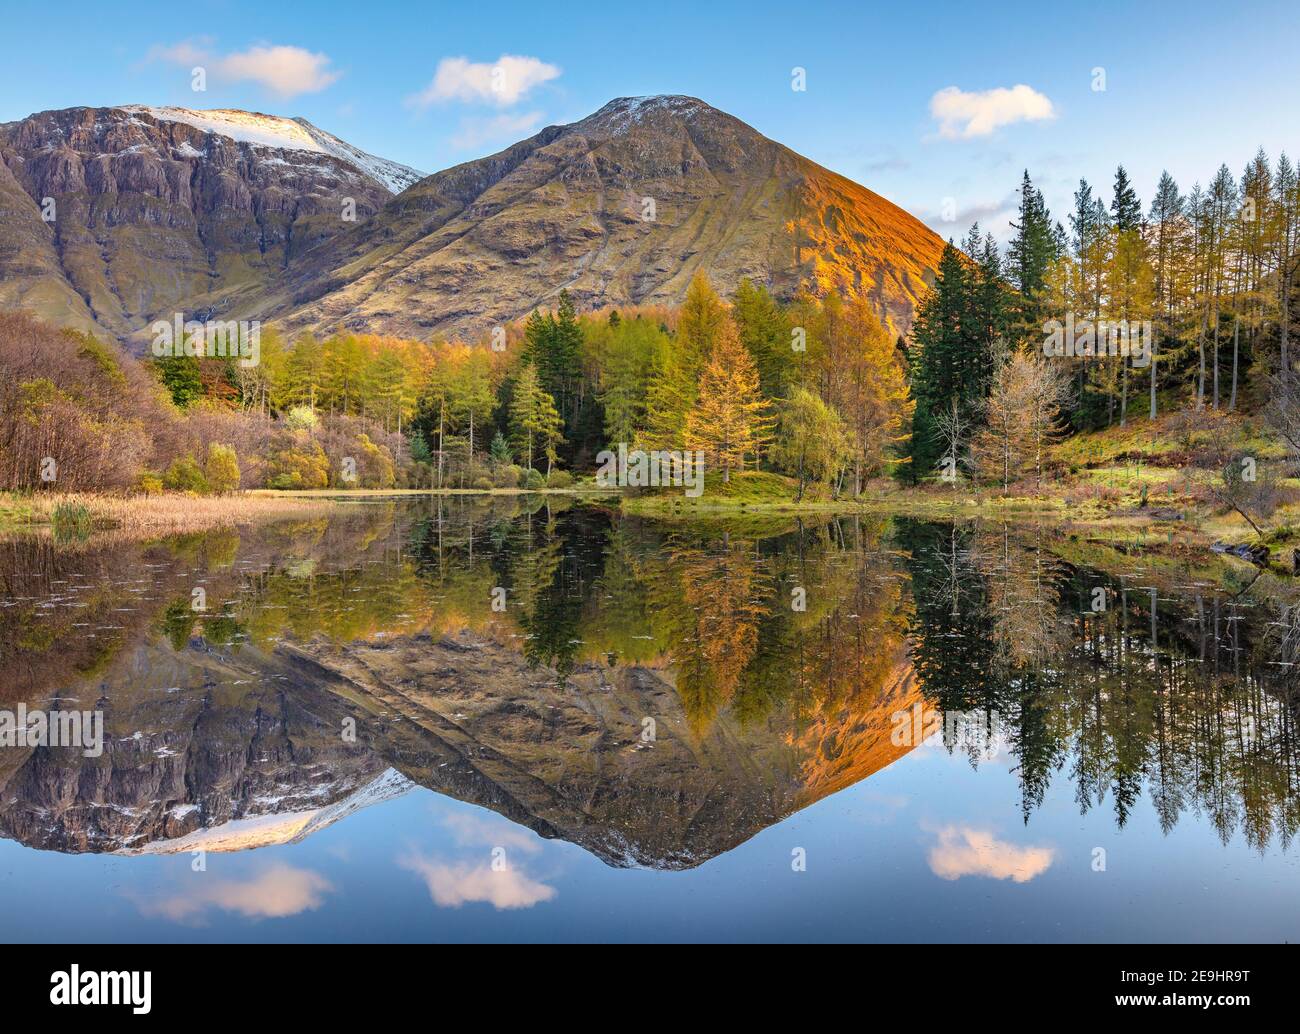 Glencoe, Scotland: A small pond with fall reflections and the mountains of Glen Coe at sunset Stock Photo